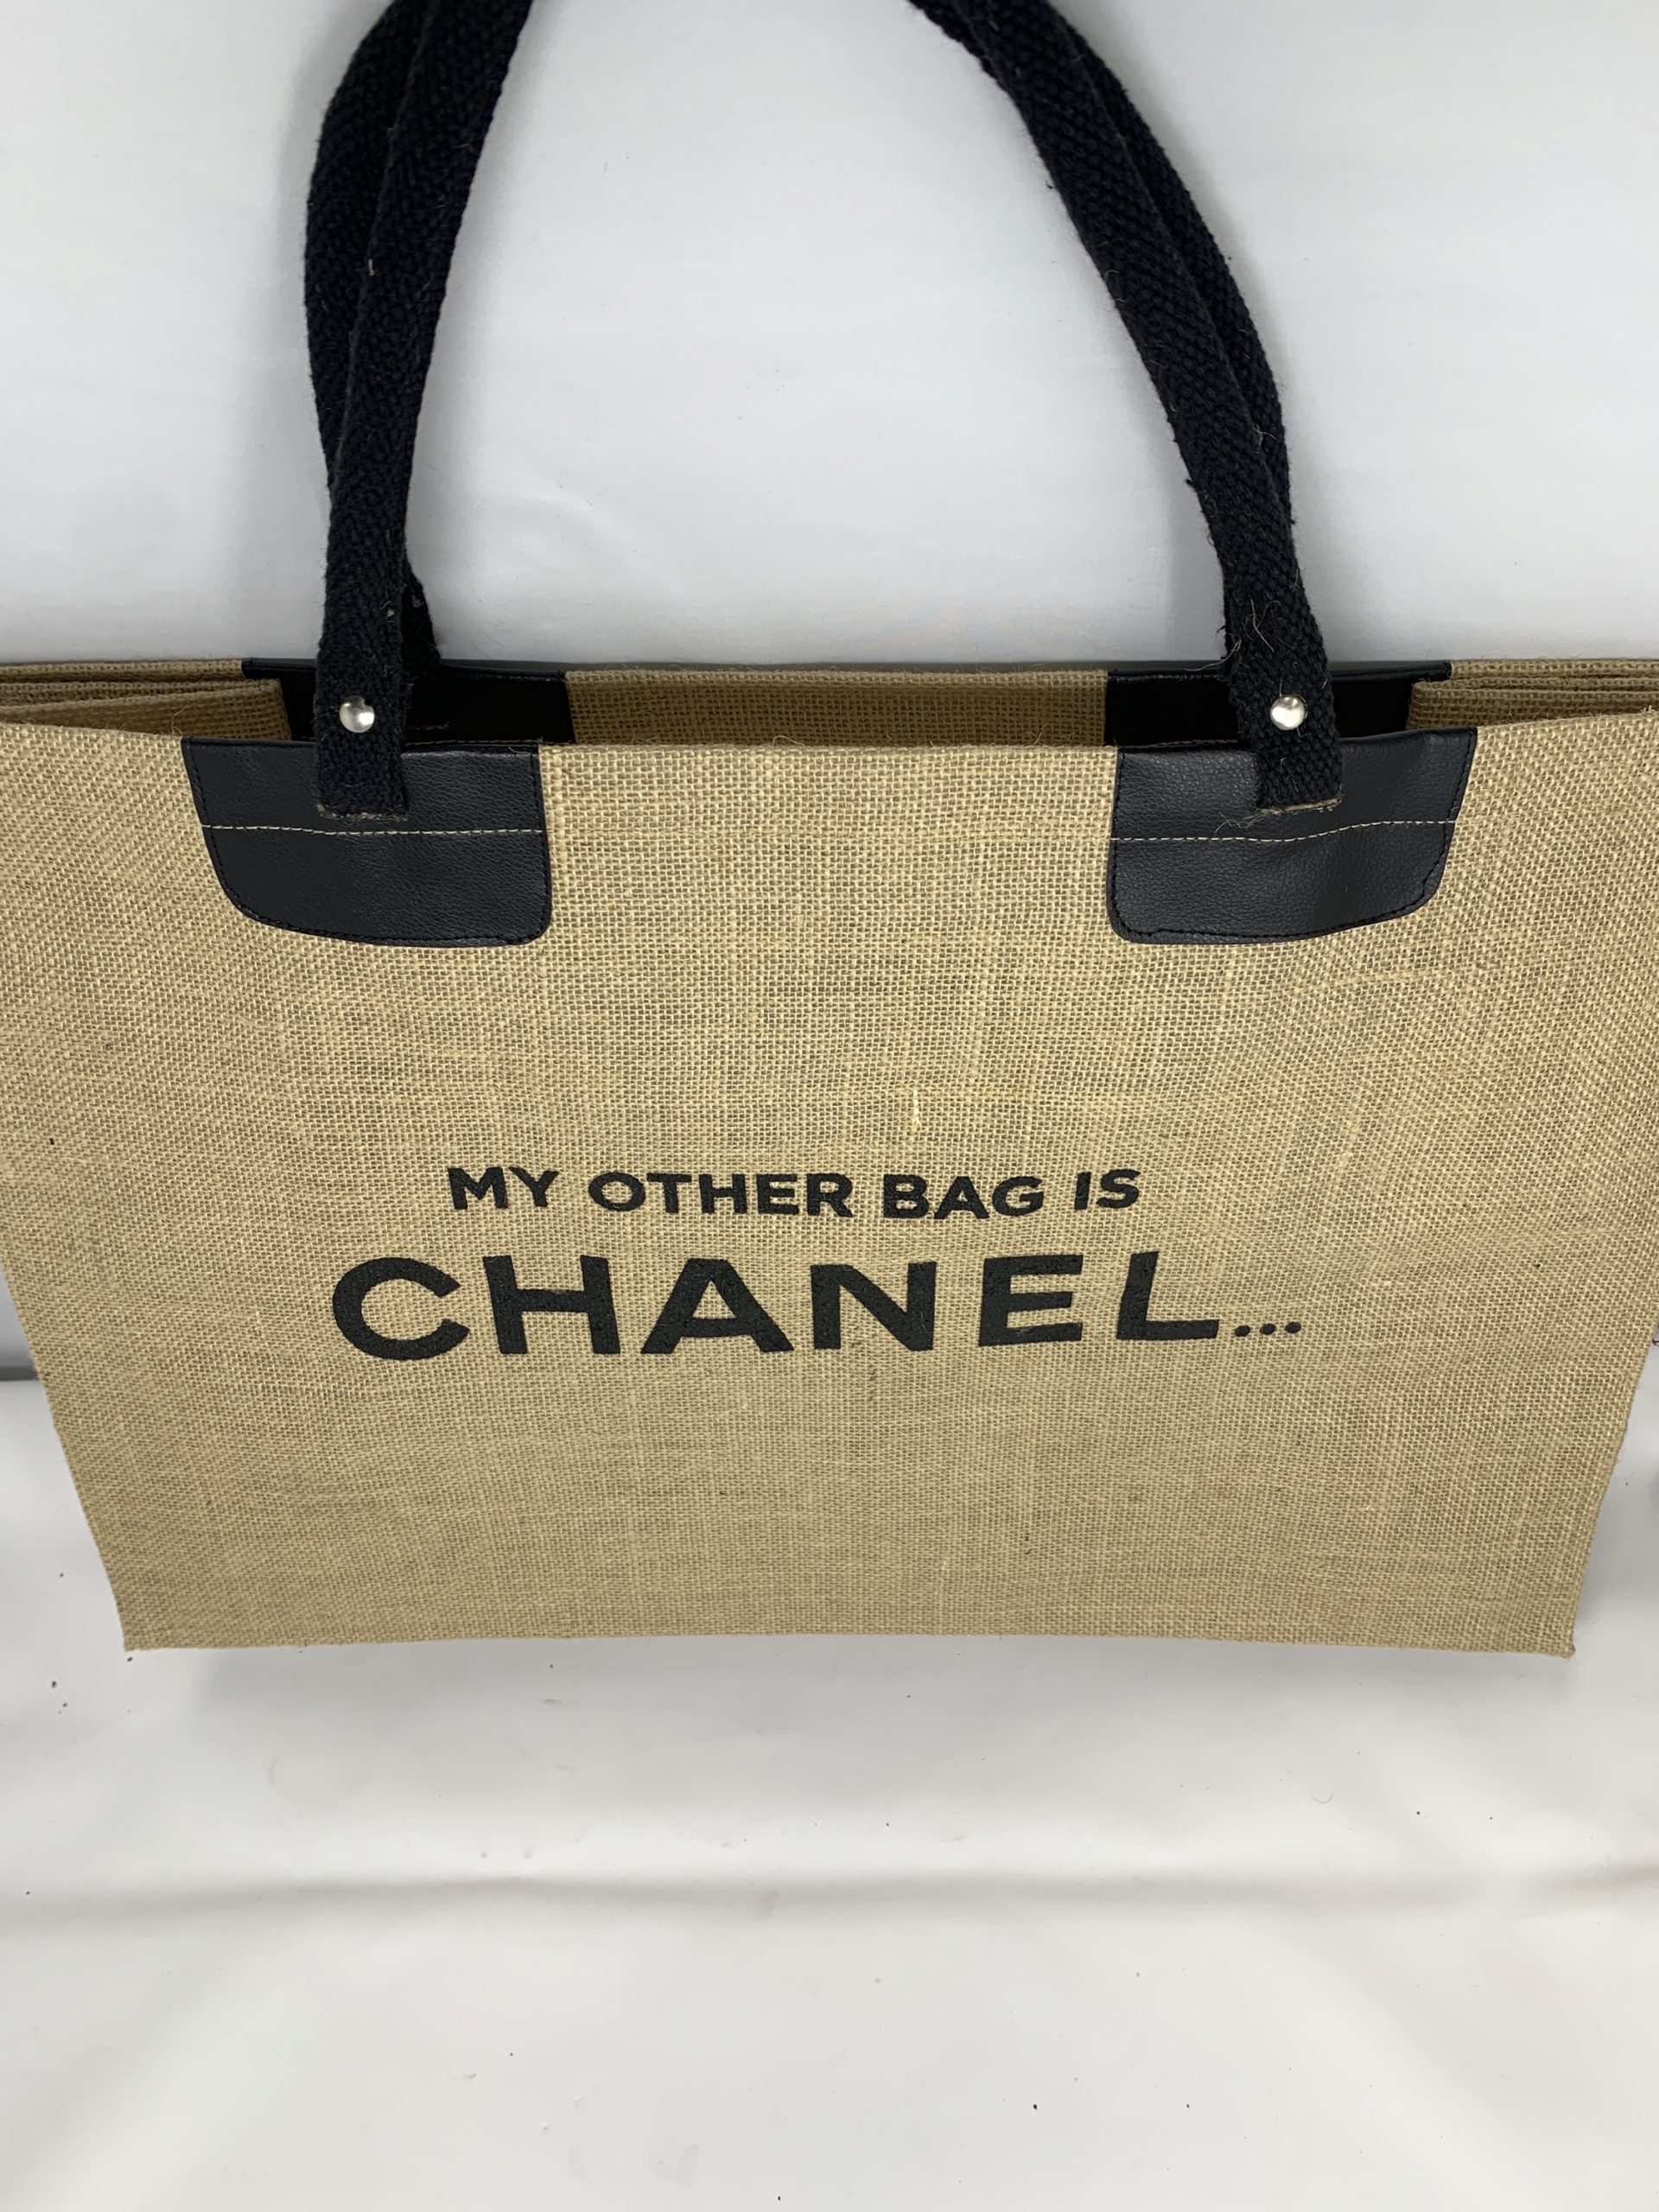 R Langen Obsessed Luxury My Other Bag Is A Chanel Jutetote Modern Art Design